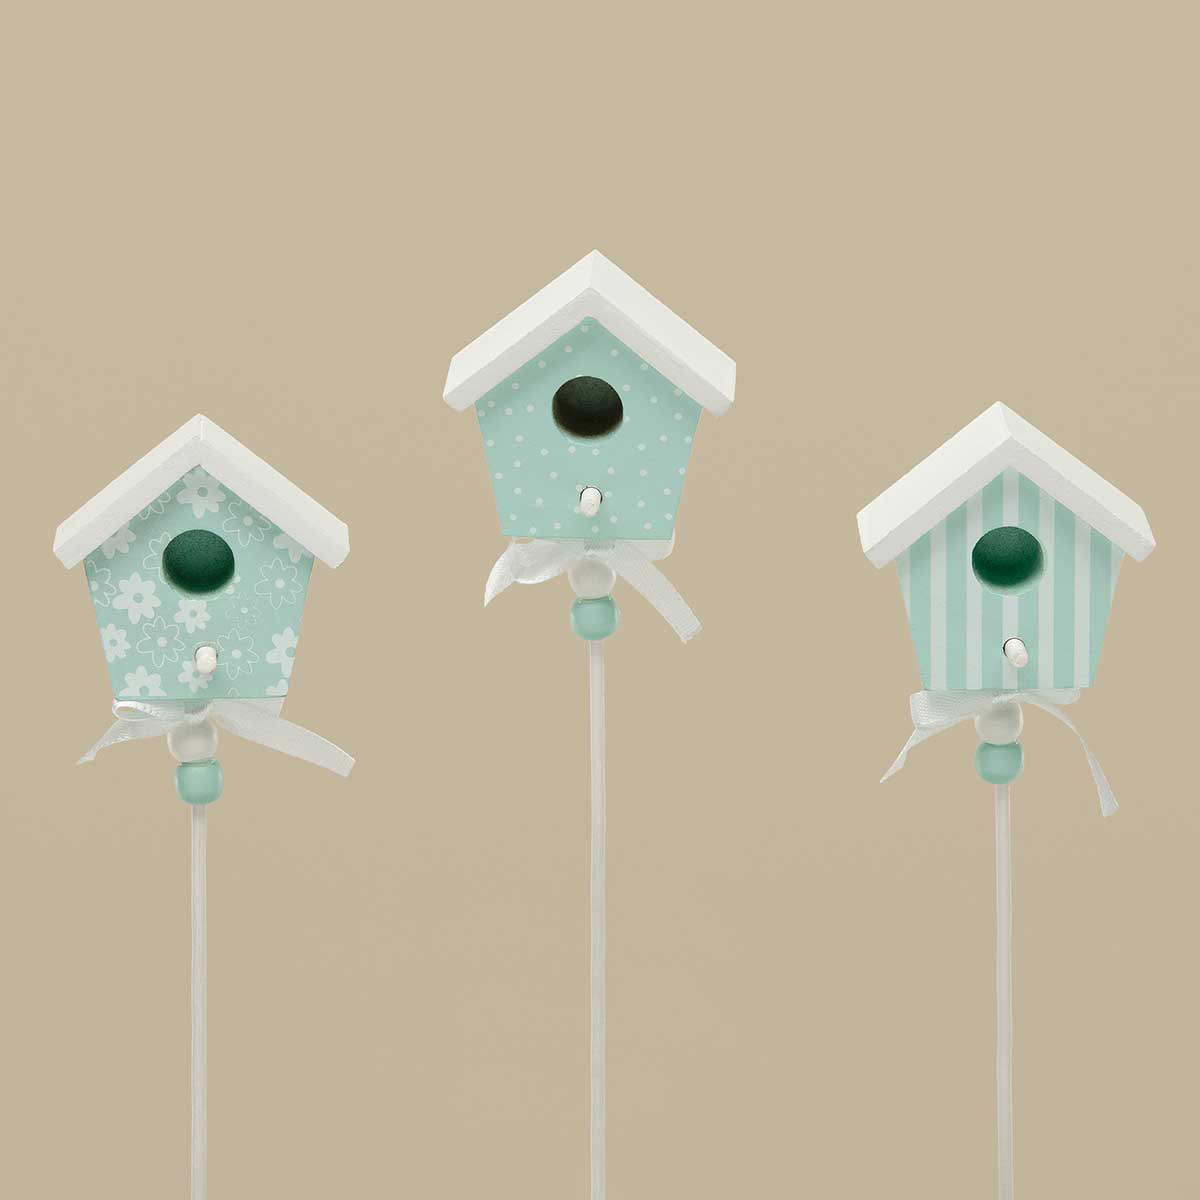 b50 BIRDHOUSE ON STICK 3 ASSORTED 2.25IN X 1.25IN X 2.25IN WOOD